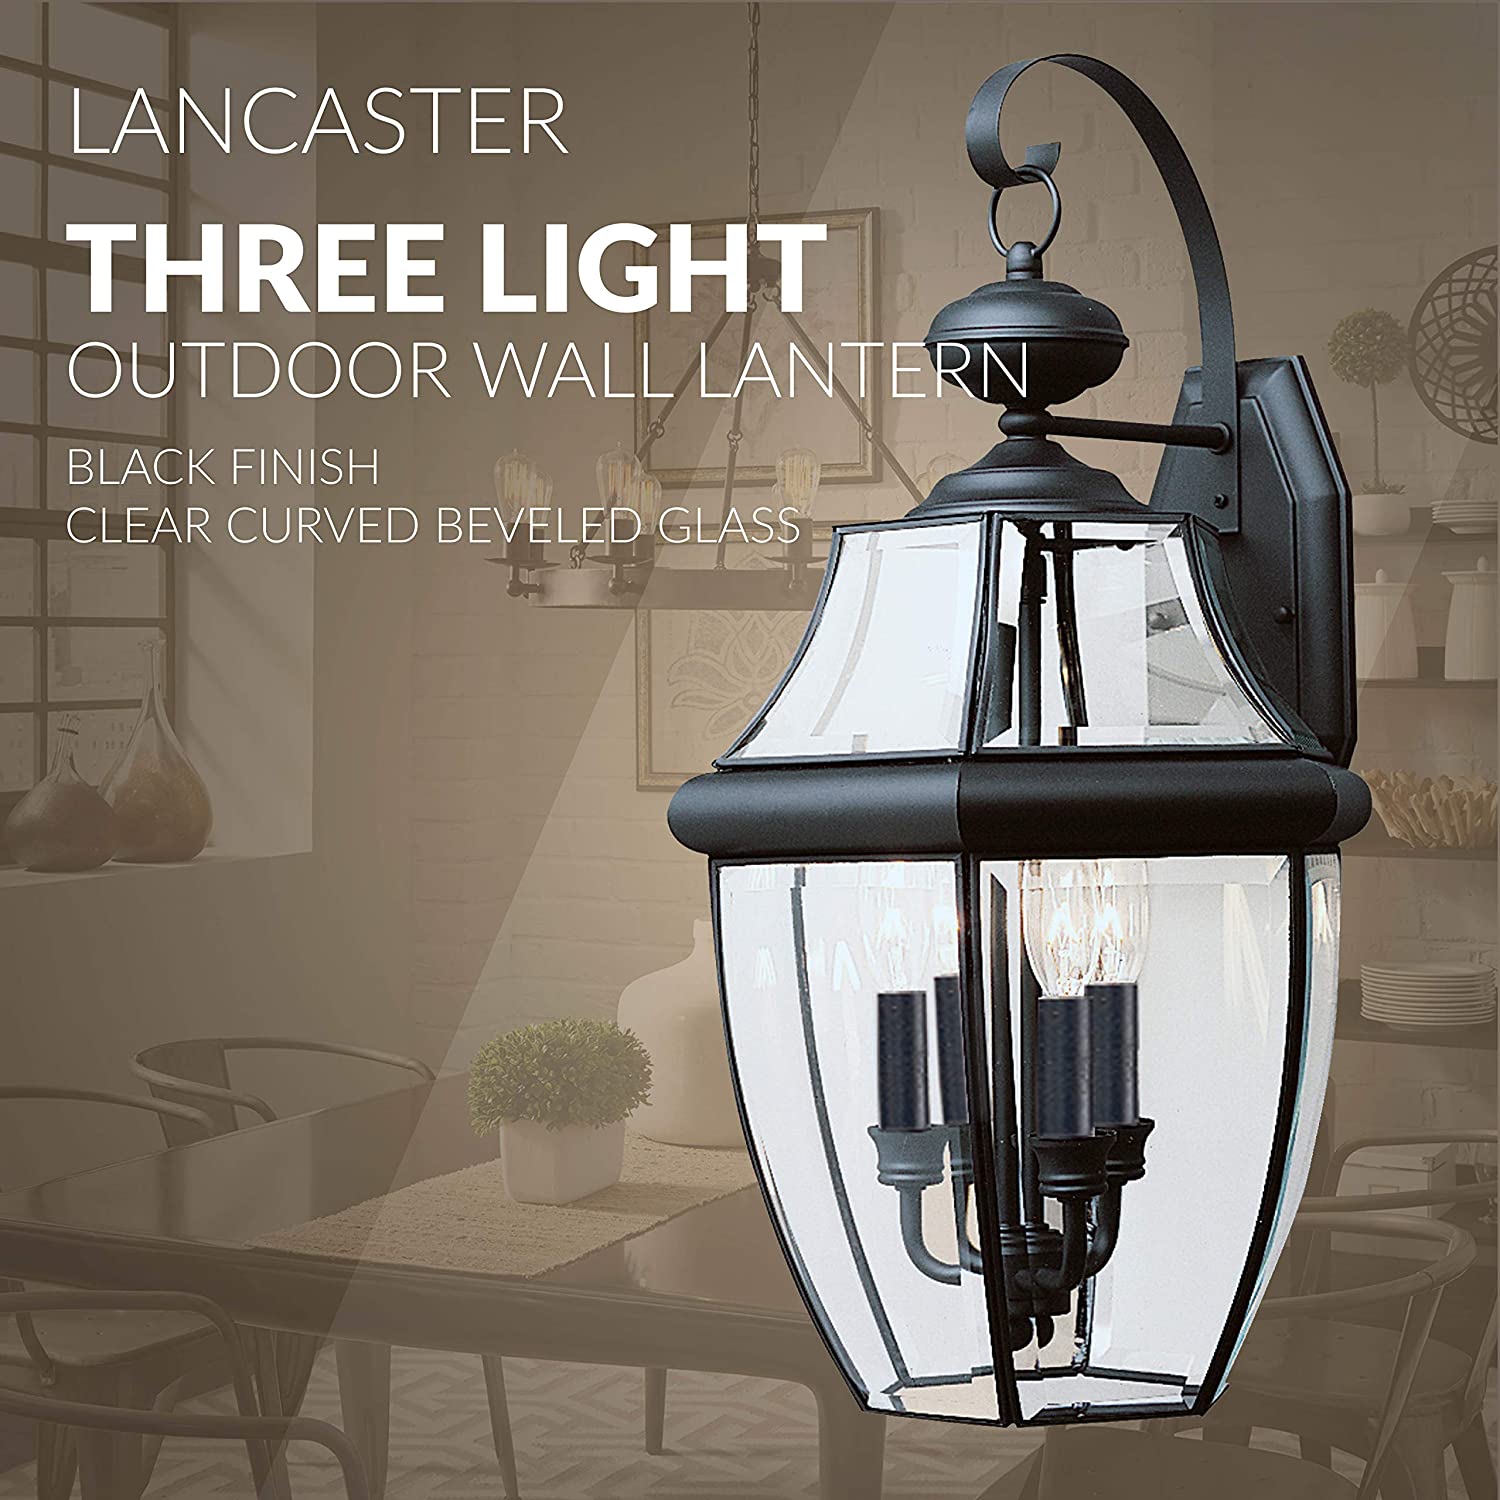 Sea Gull Lighting 8039-12 2-Light Lancaster Medium Outdoor Wall Lantern, Clear Beveled Glass and Black, Finish: Black By Visit the Sea Gull Lighting Store - image 5 of 5